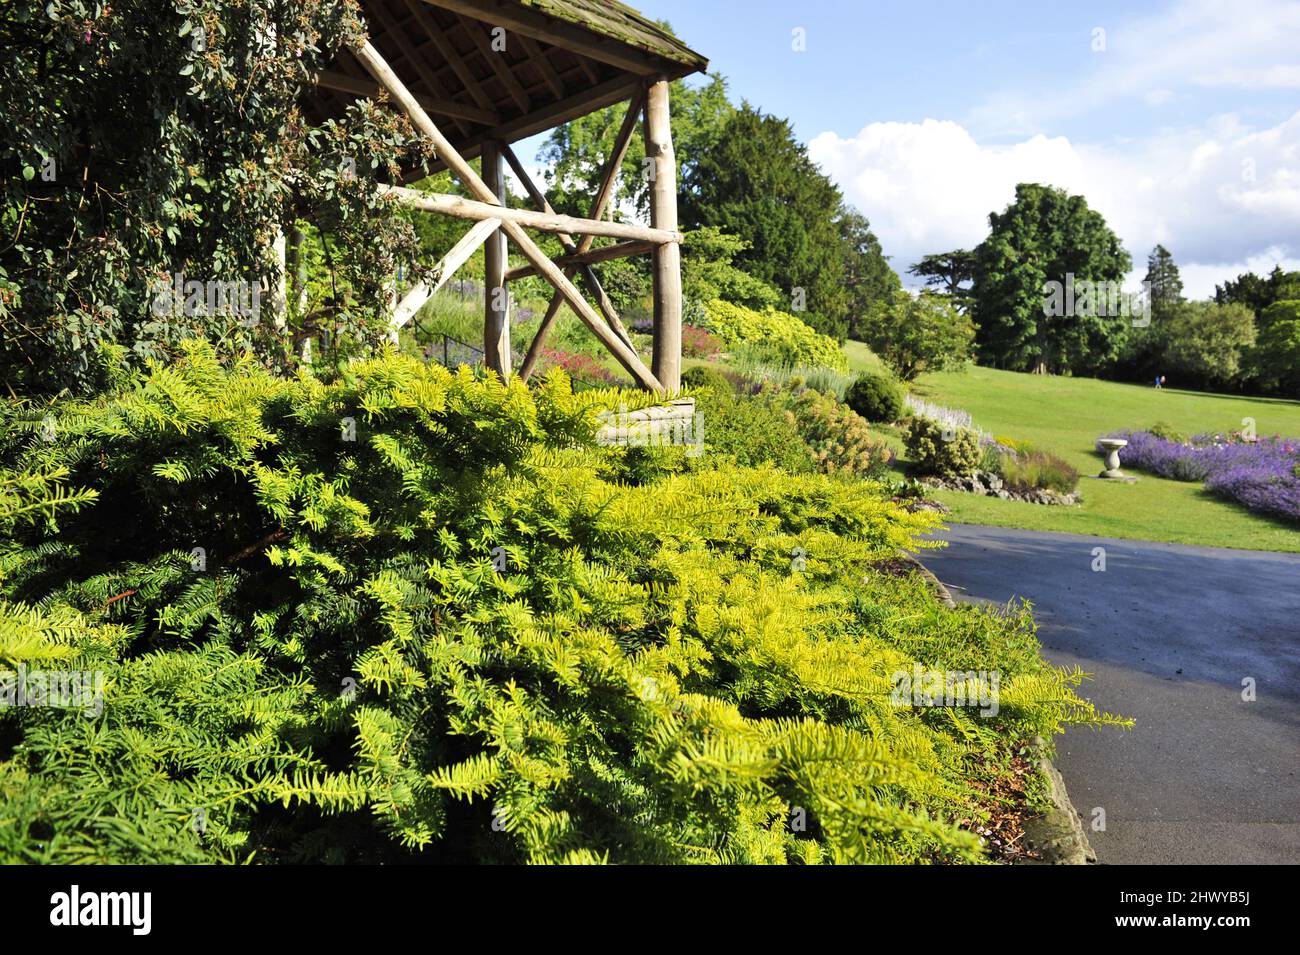 Evergreen yew tree and wooden pergola with flower beds in spring, Terrace gardens in Richmond London UK. Stock Photo